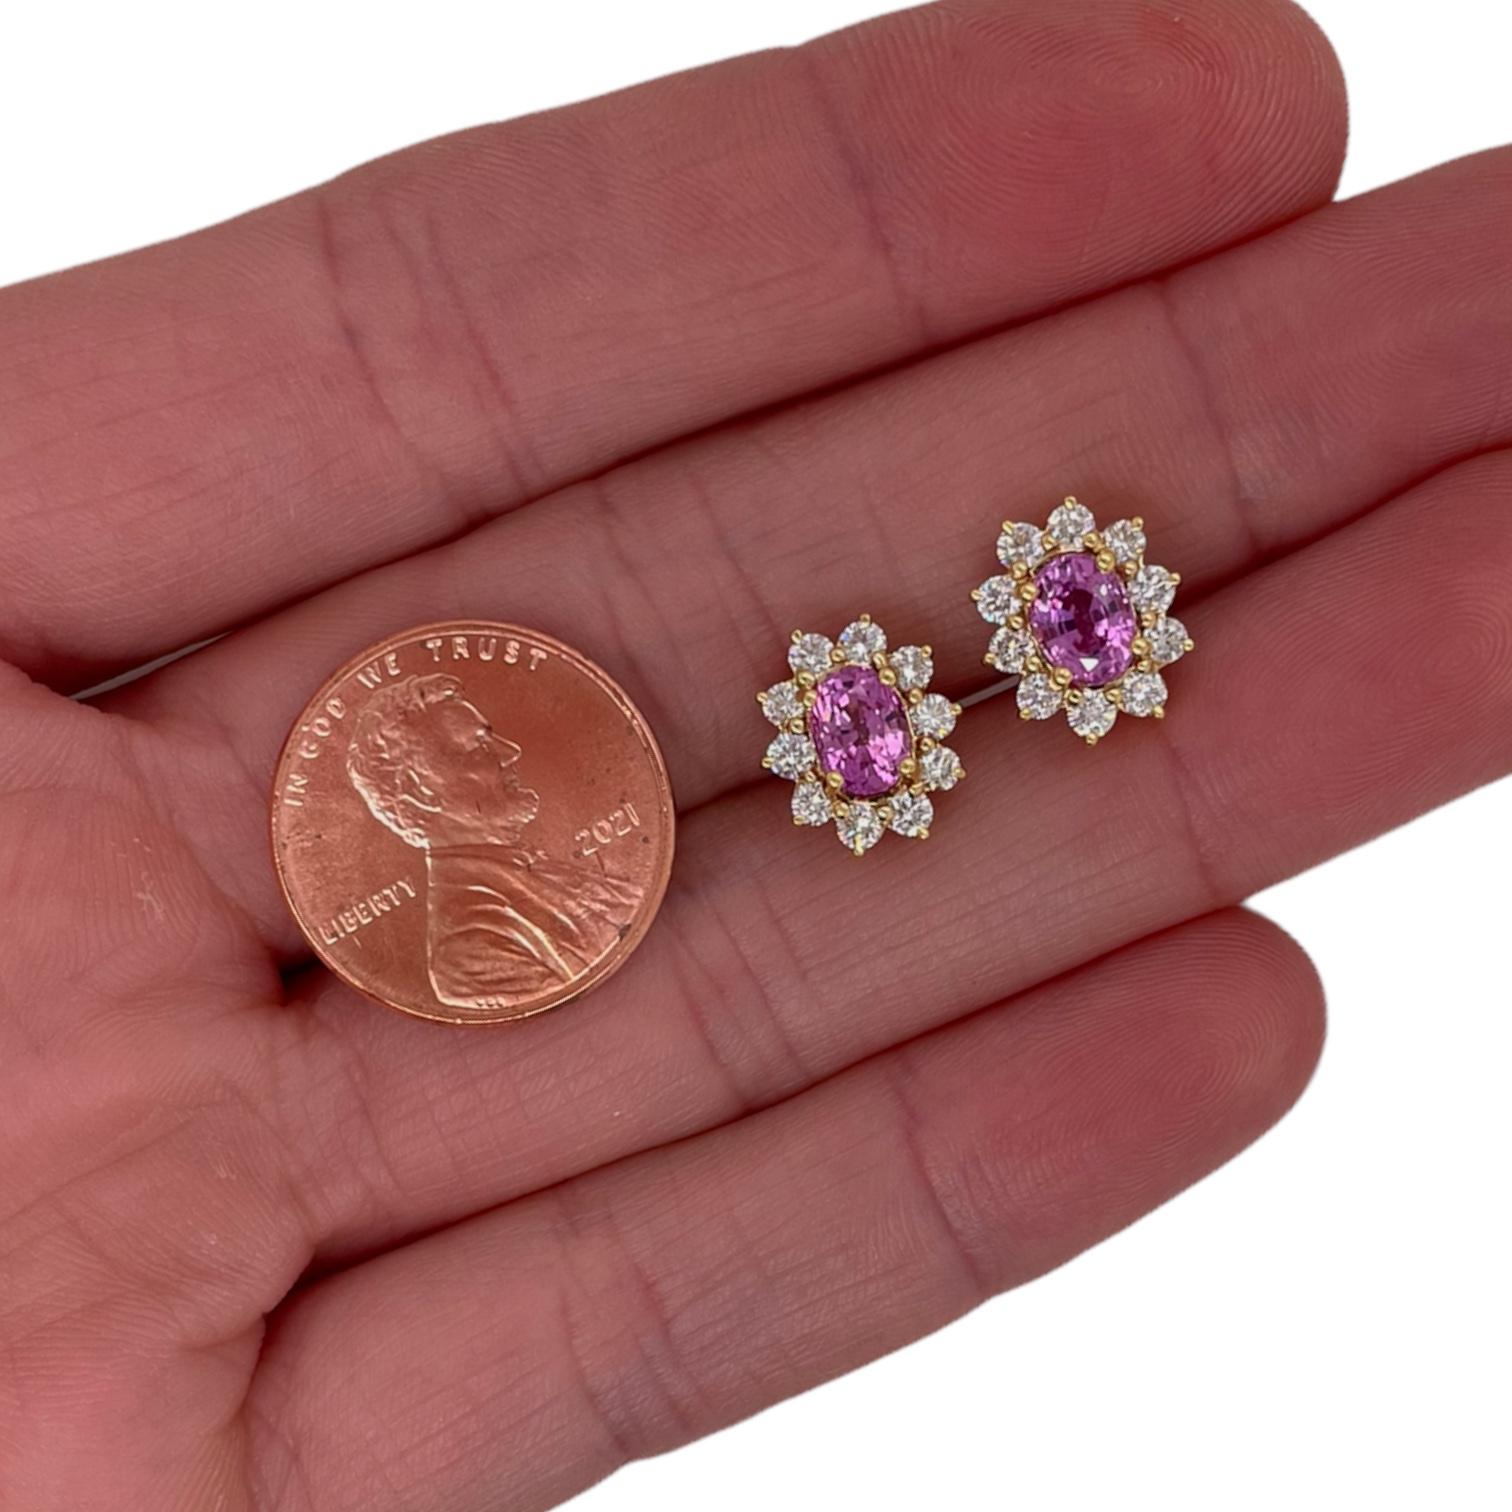 Cute pink sapphire and diamond halo stud earrings in 18k yellow gold. Earring contain 2 oval pink sapphires 1.63tcw, measuring approximately 6x4.5mm and 20 round brilliant diamonds, 0.74tcw. Diamonds are near colorless and SI1 in clarity. All stones